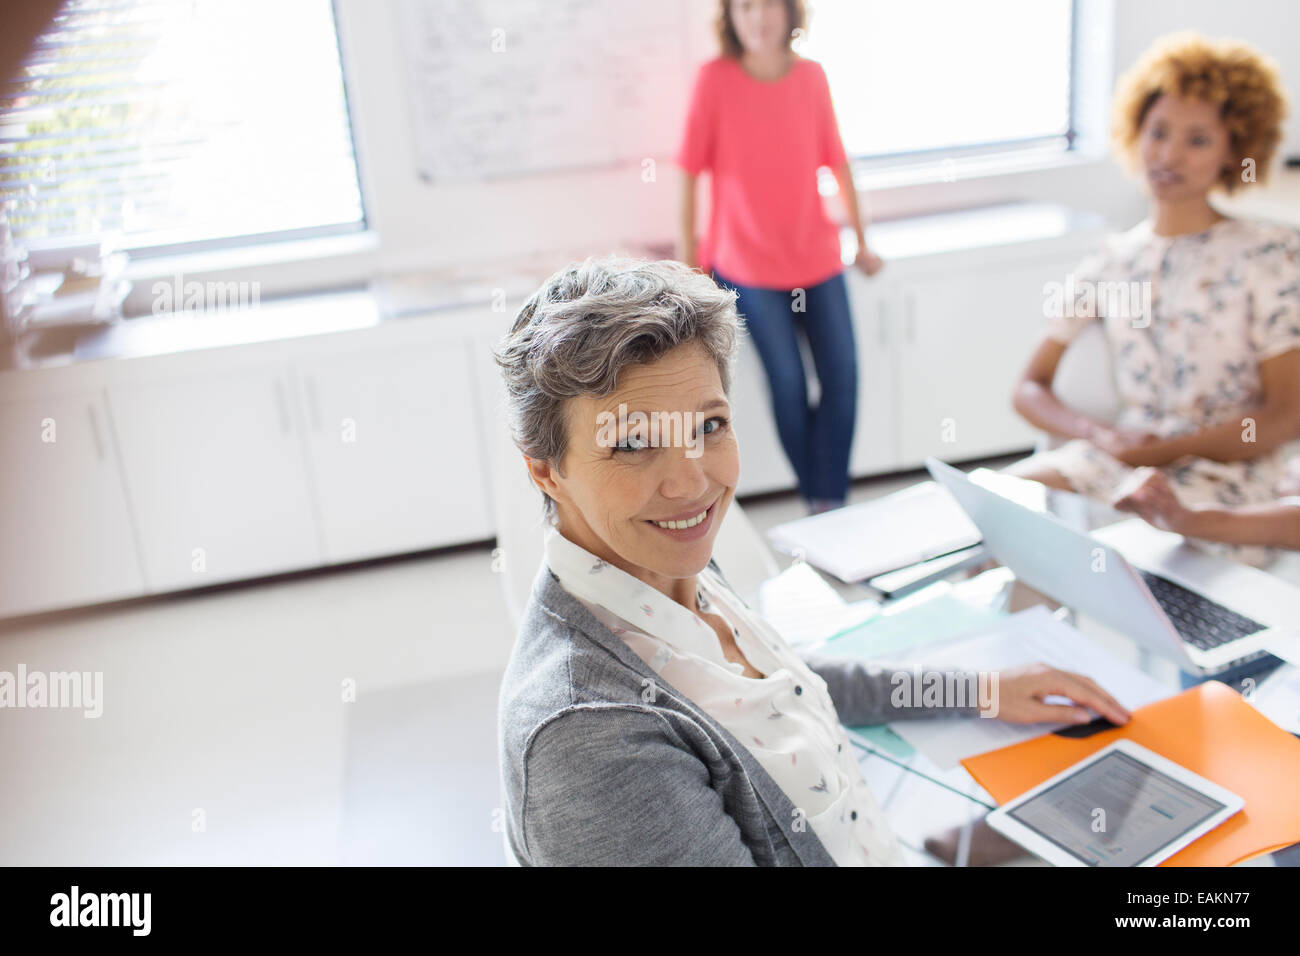 Portrait of smiling mature businesswoman at desk in office Stock Photo